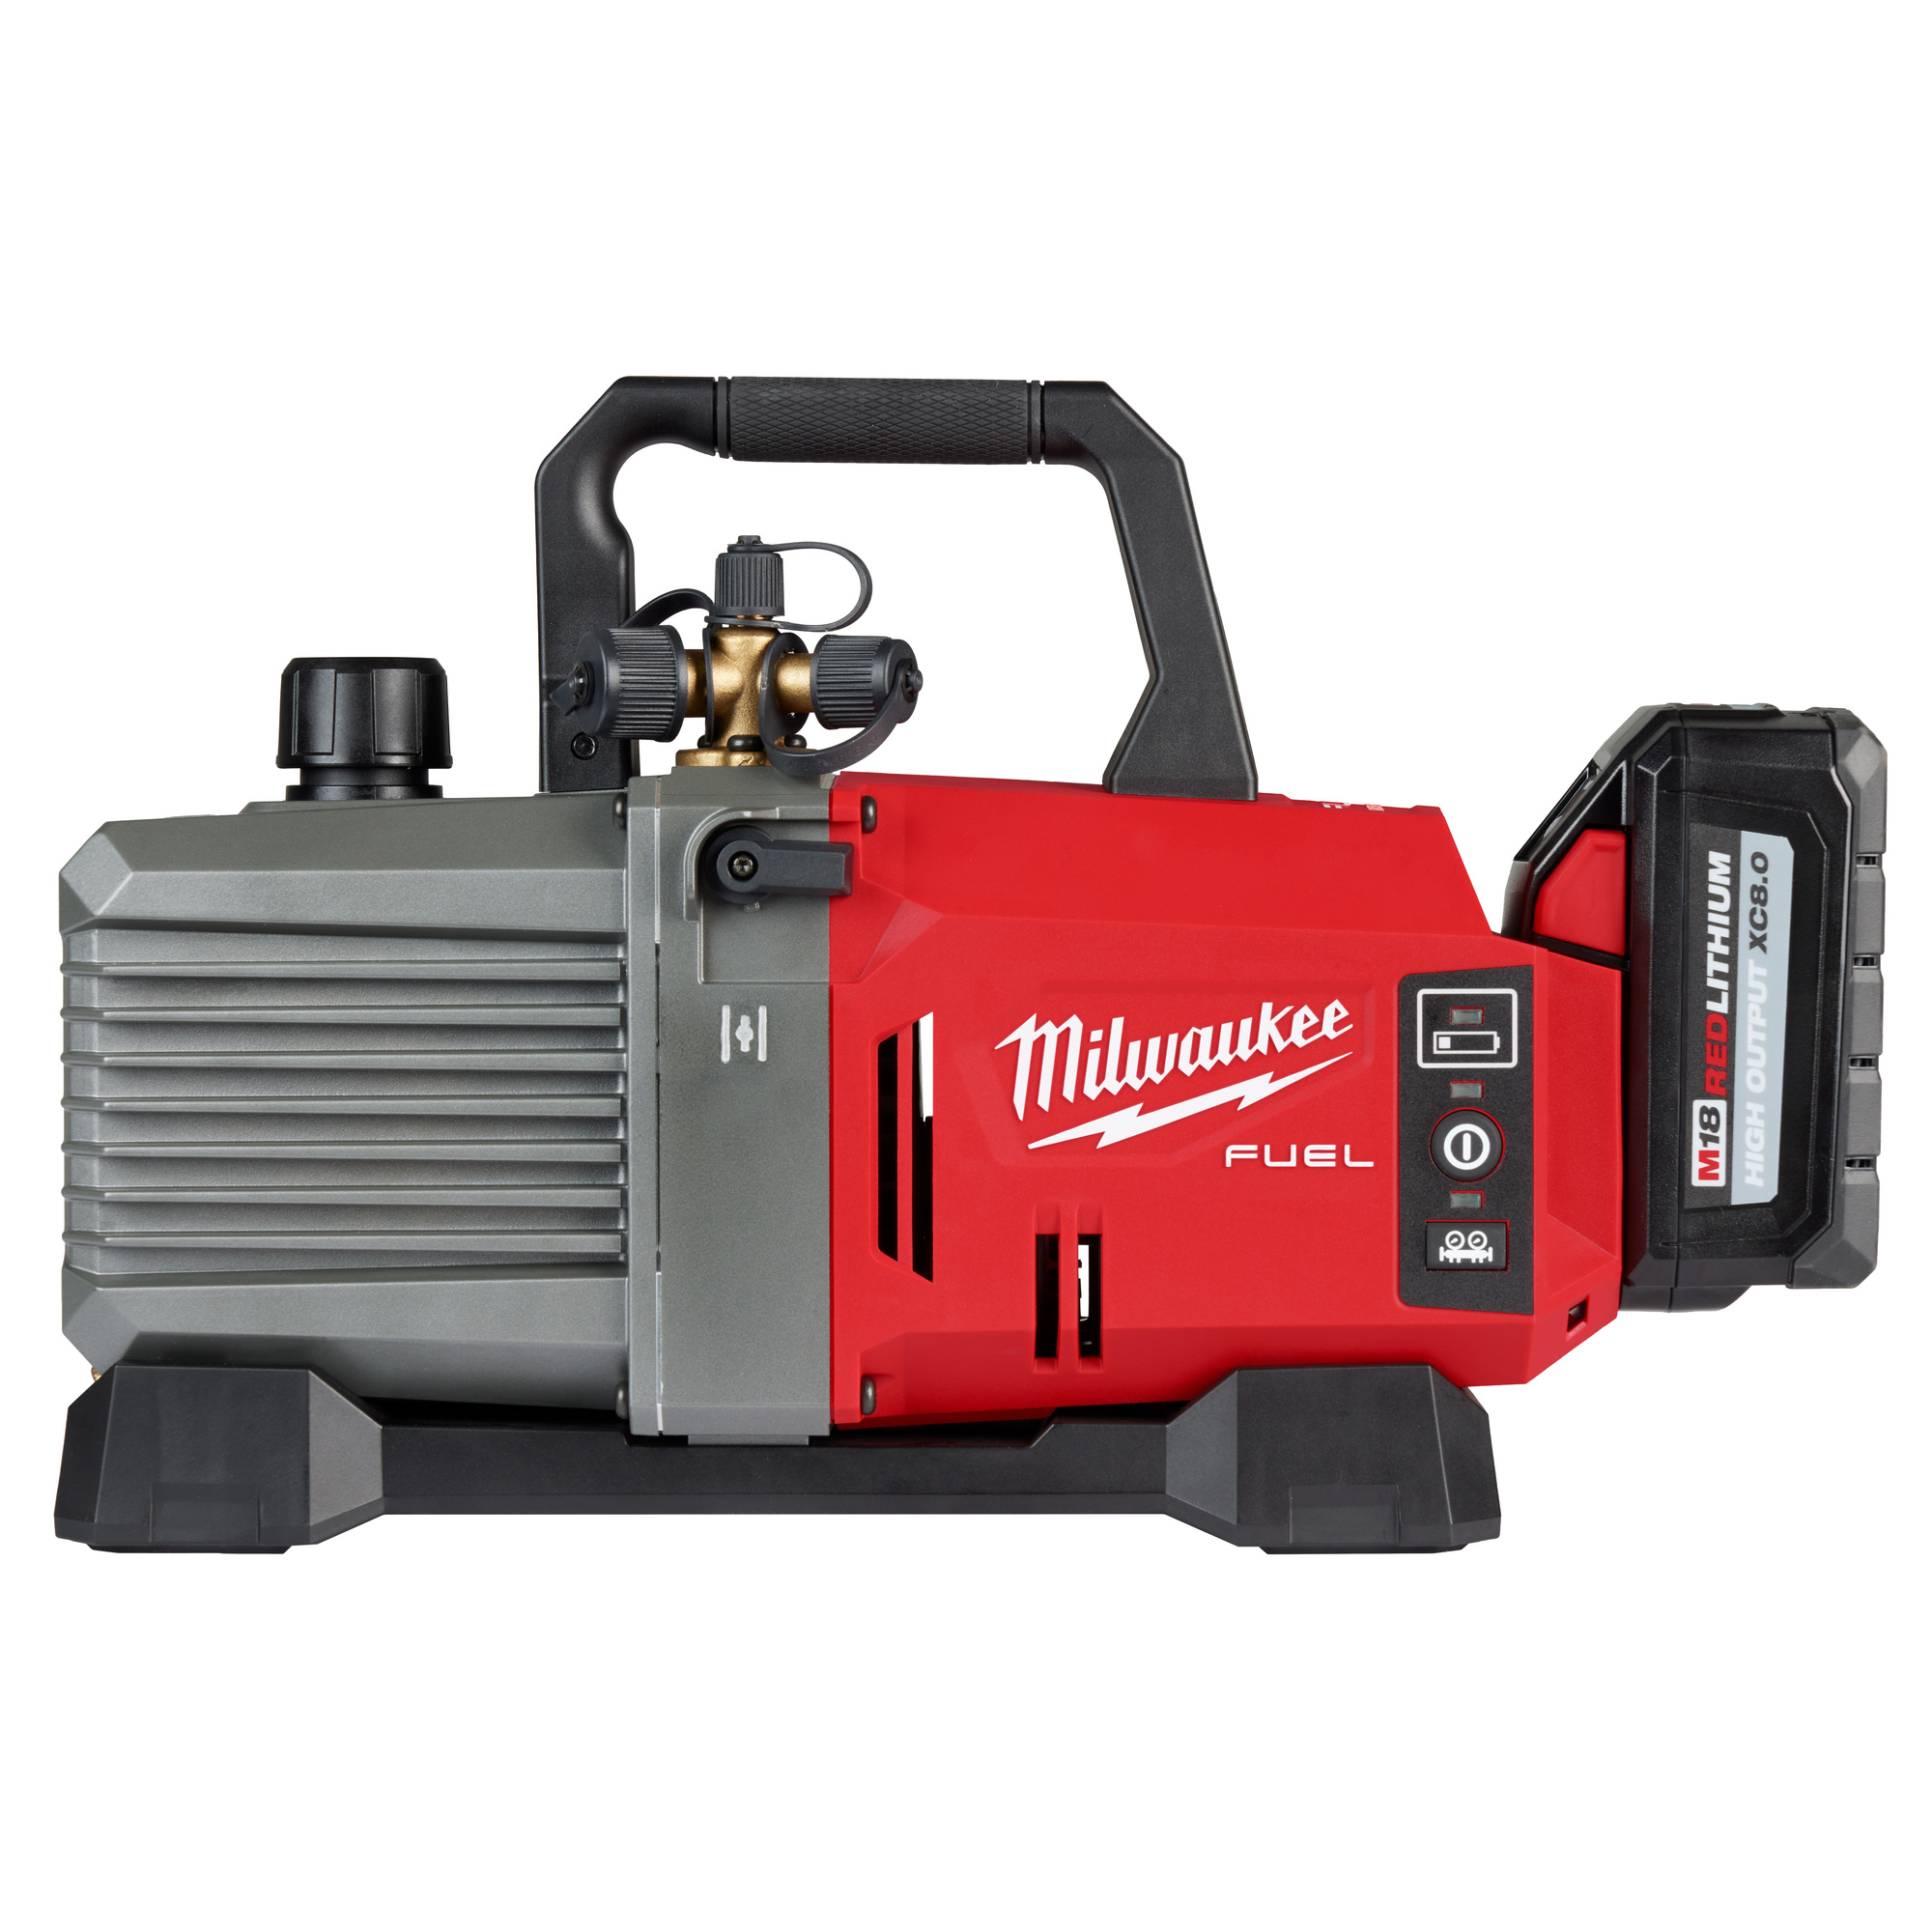 Milwaukee, M18 FUEL 5 CFM Vacuum Pump Kit, Chuck Size 1/2 in, Drive Size 1/2 in, Tools Included (qty.) 3, Model 2941-21